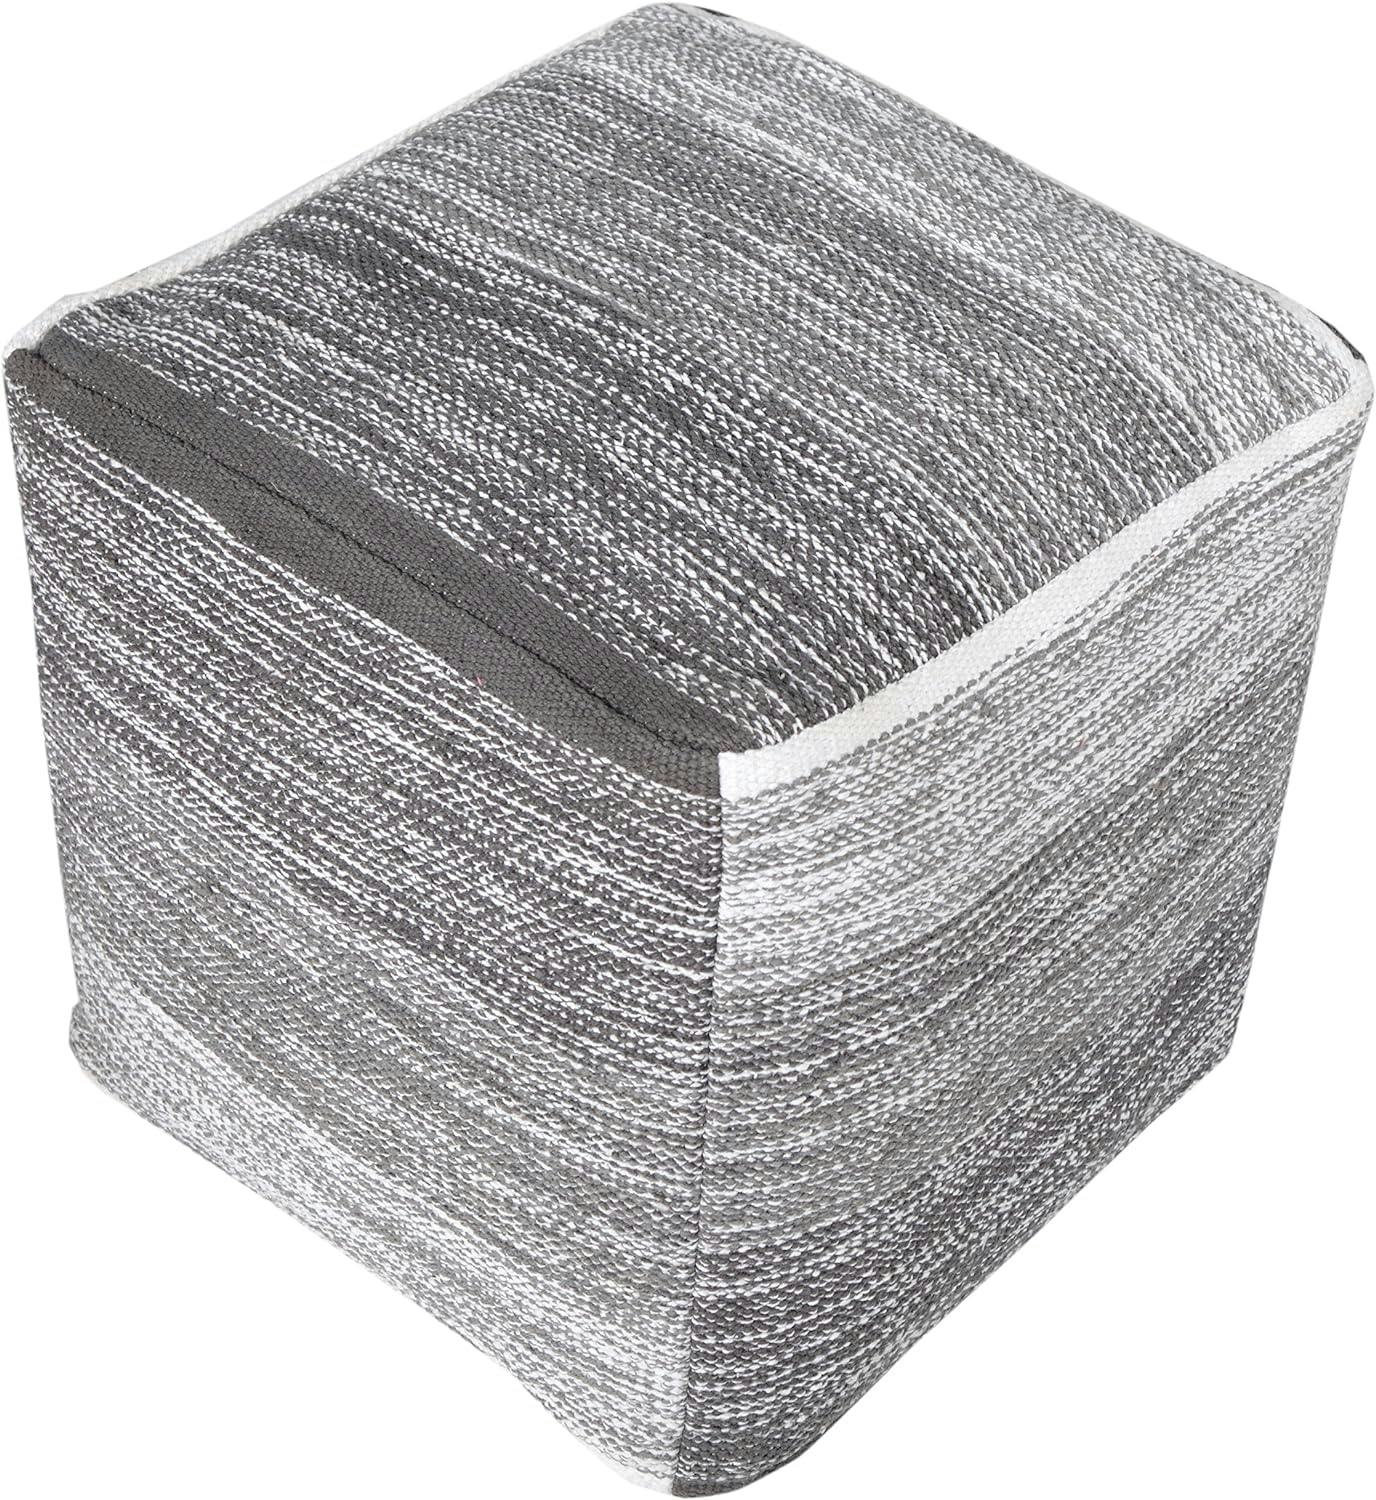 Grayscale Distressed Cube Pouf for Versatile Seating